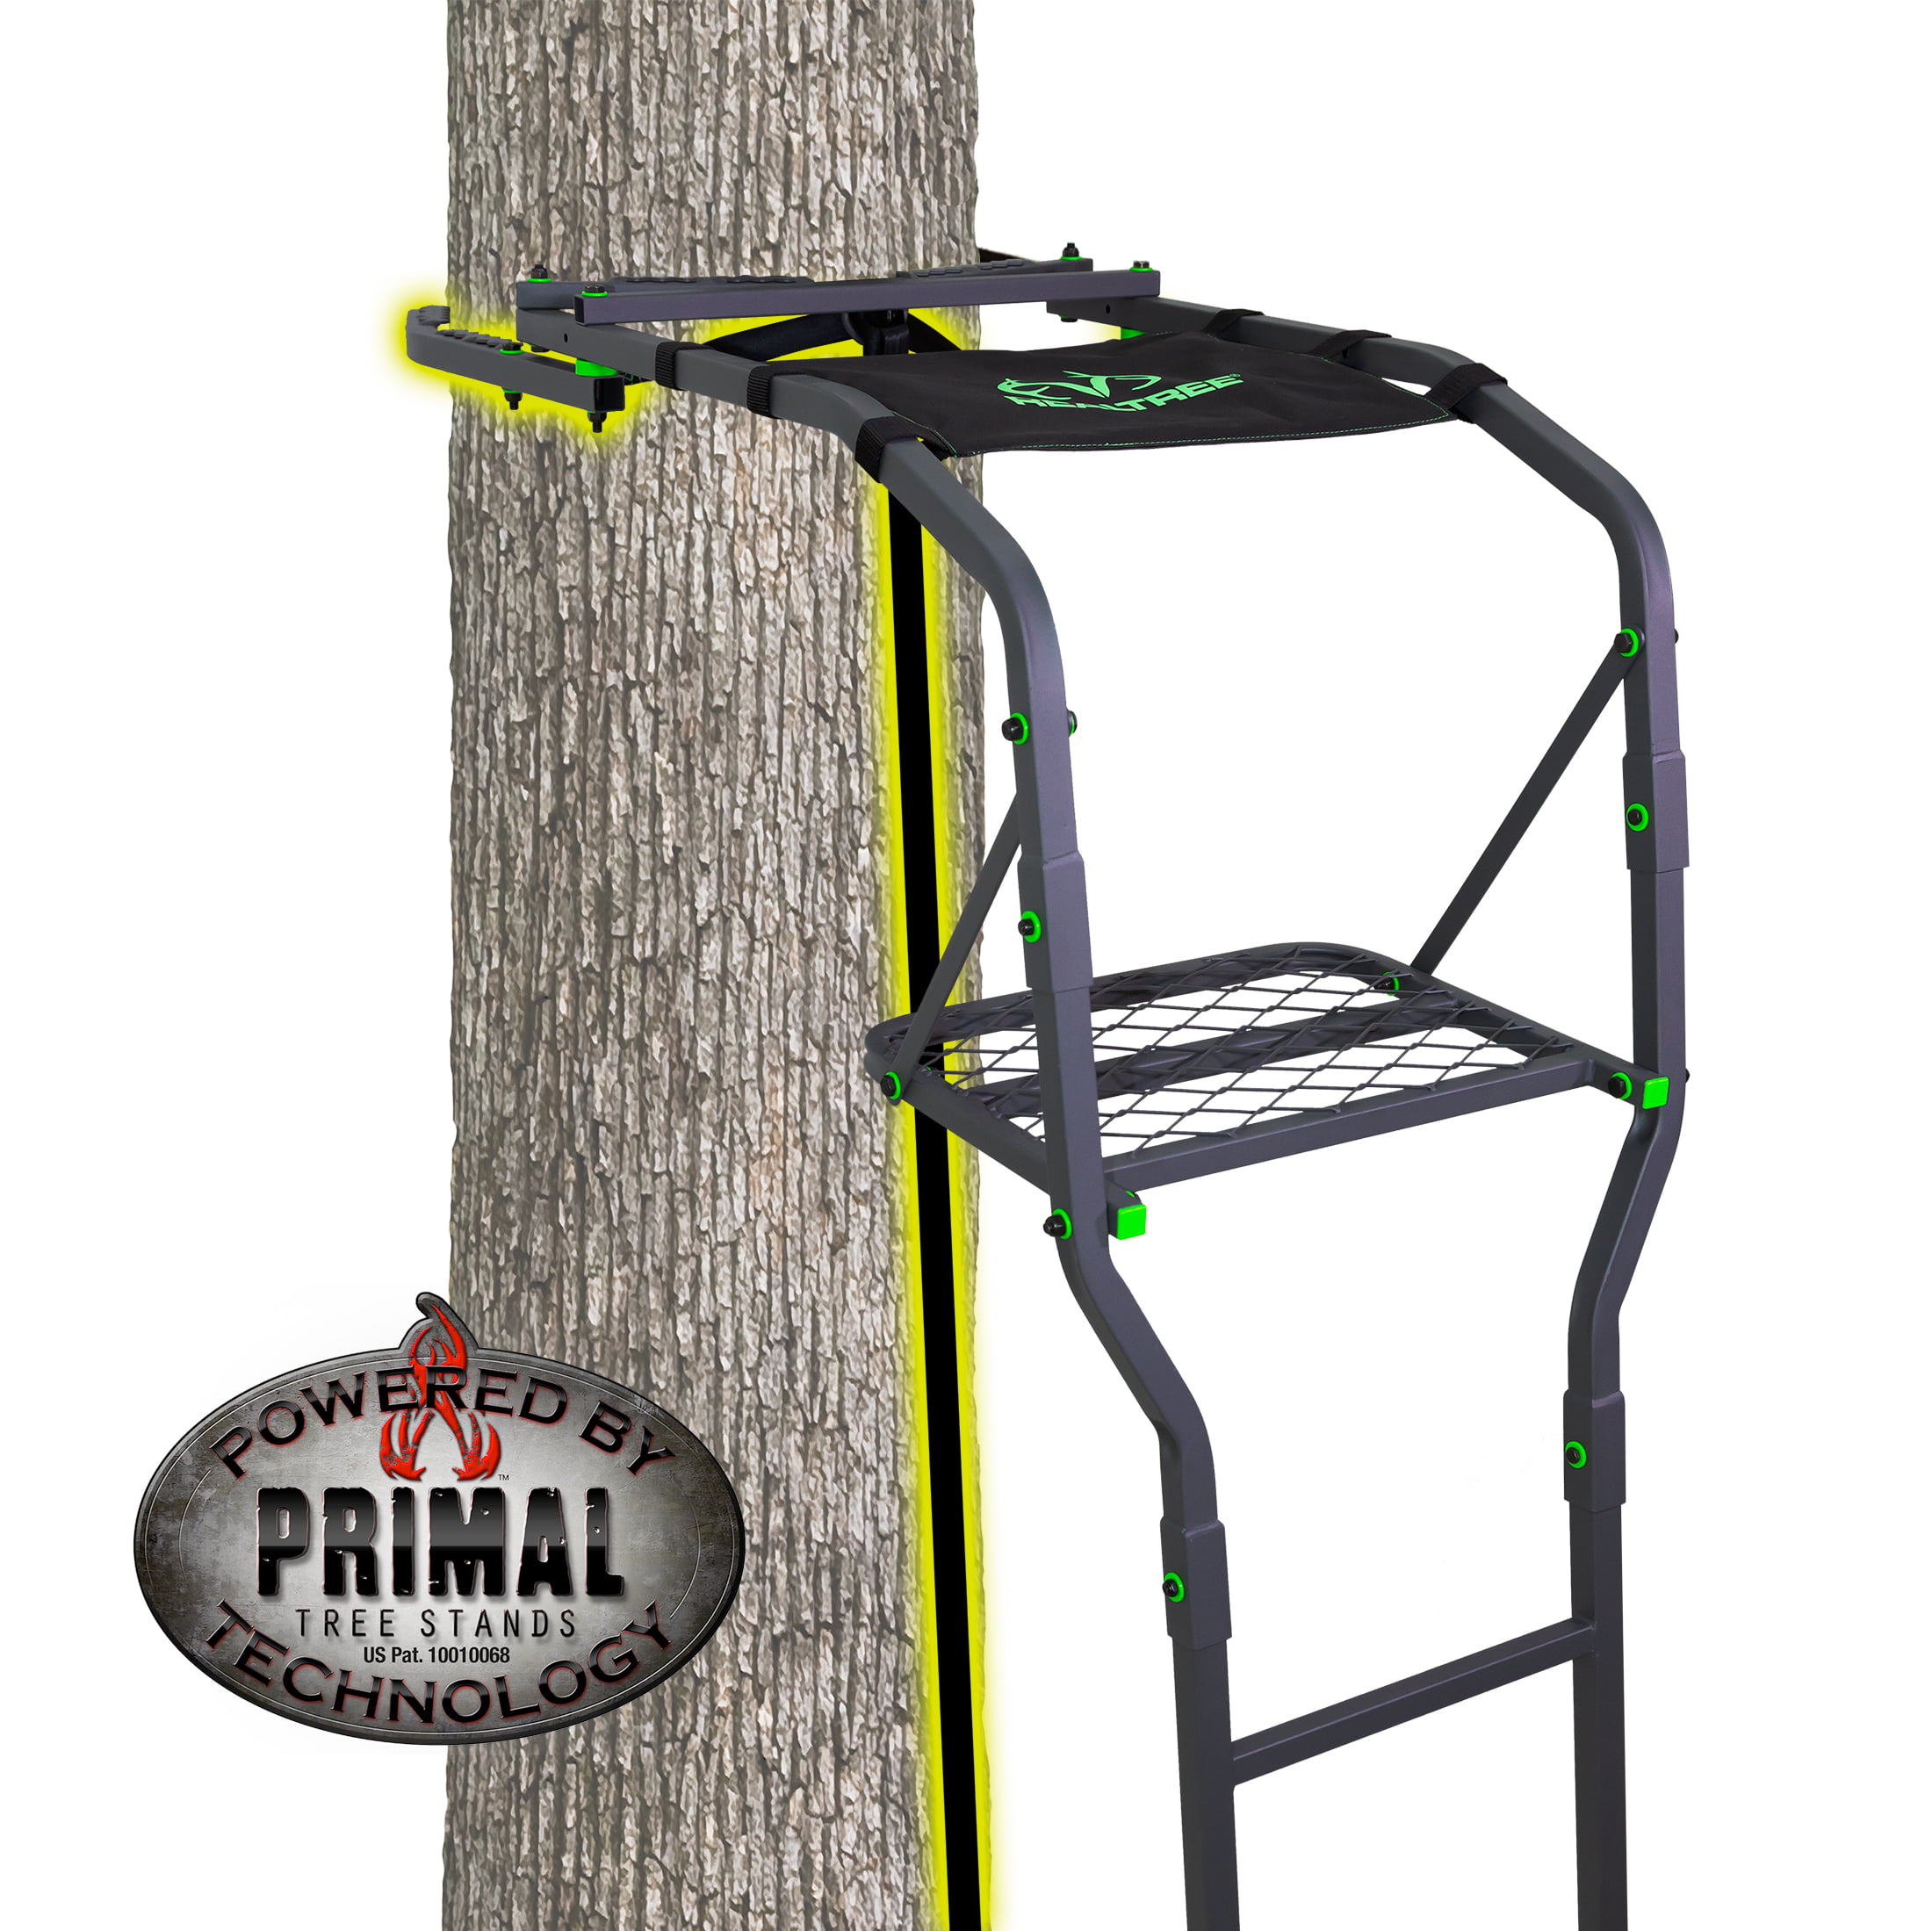 Ladder Stands Seat 16"x12" Lightweight Universal Fitting Replacement Tree Stand 